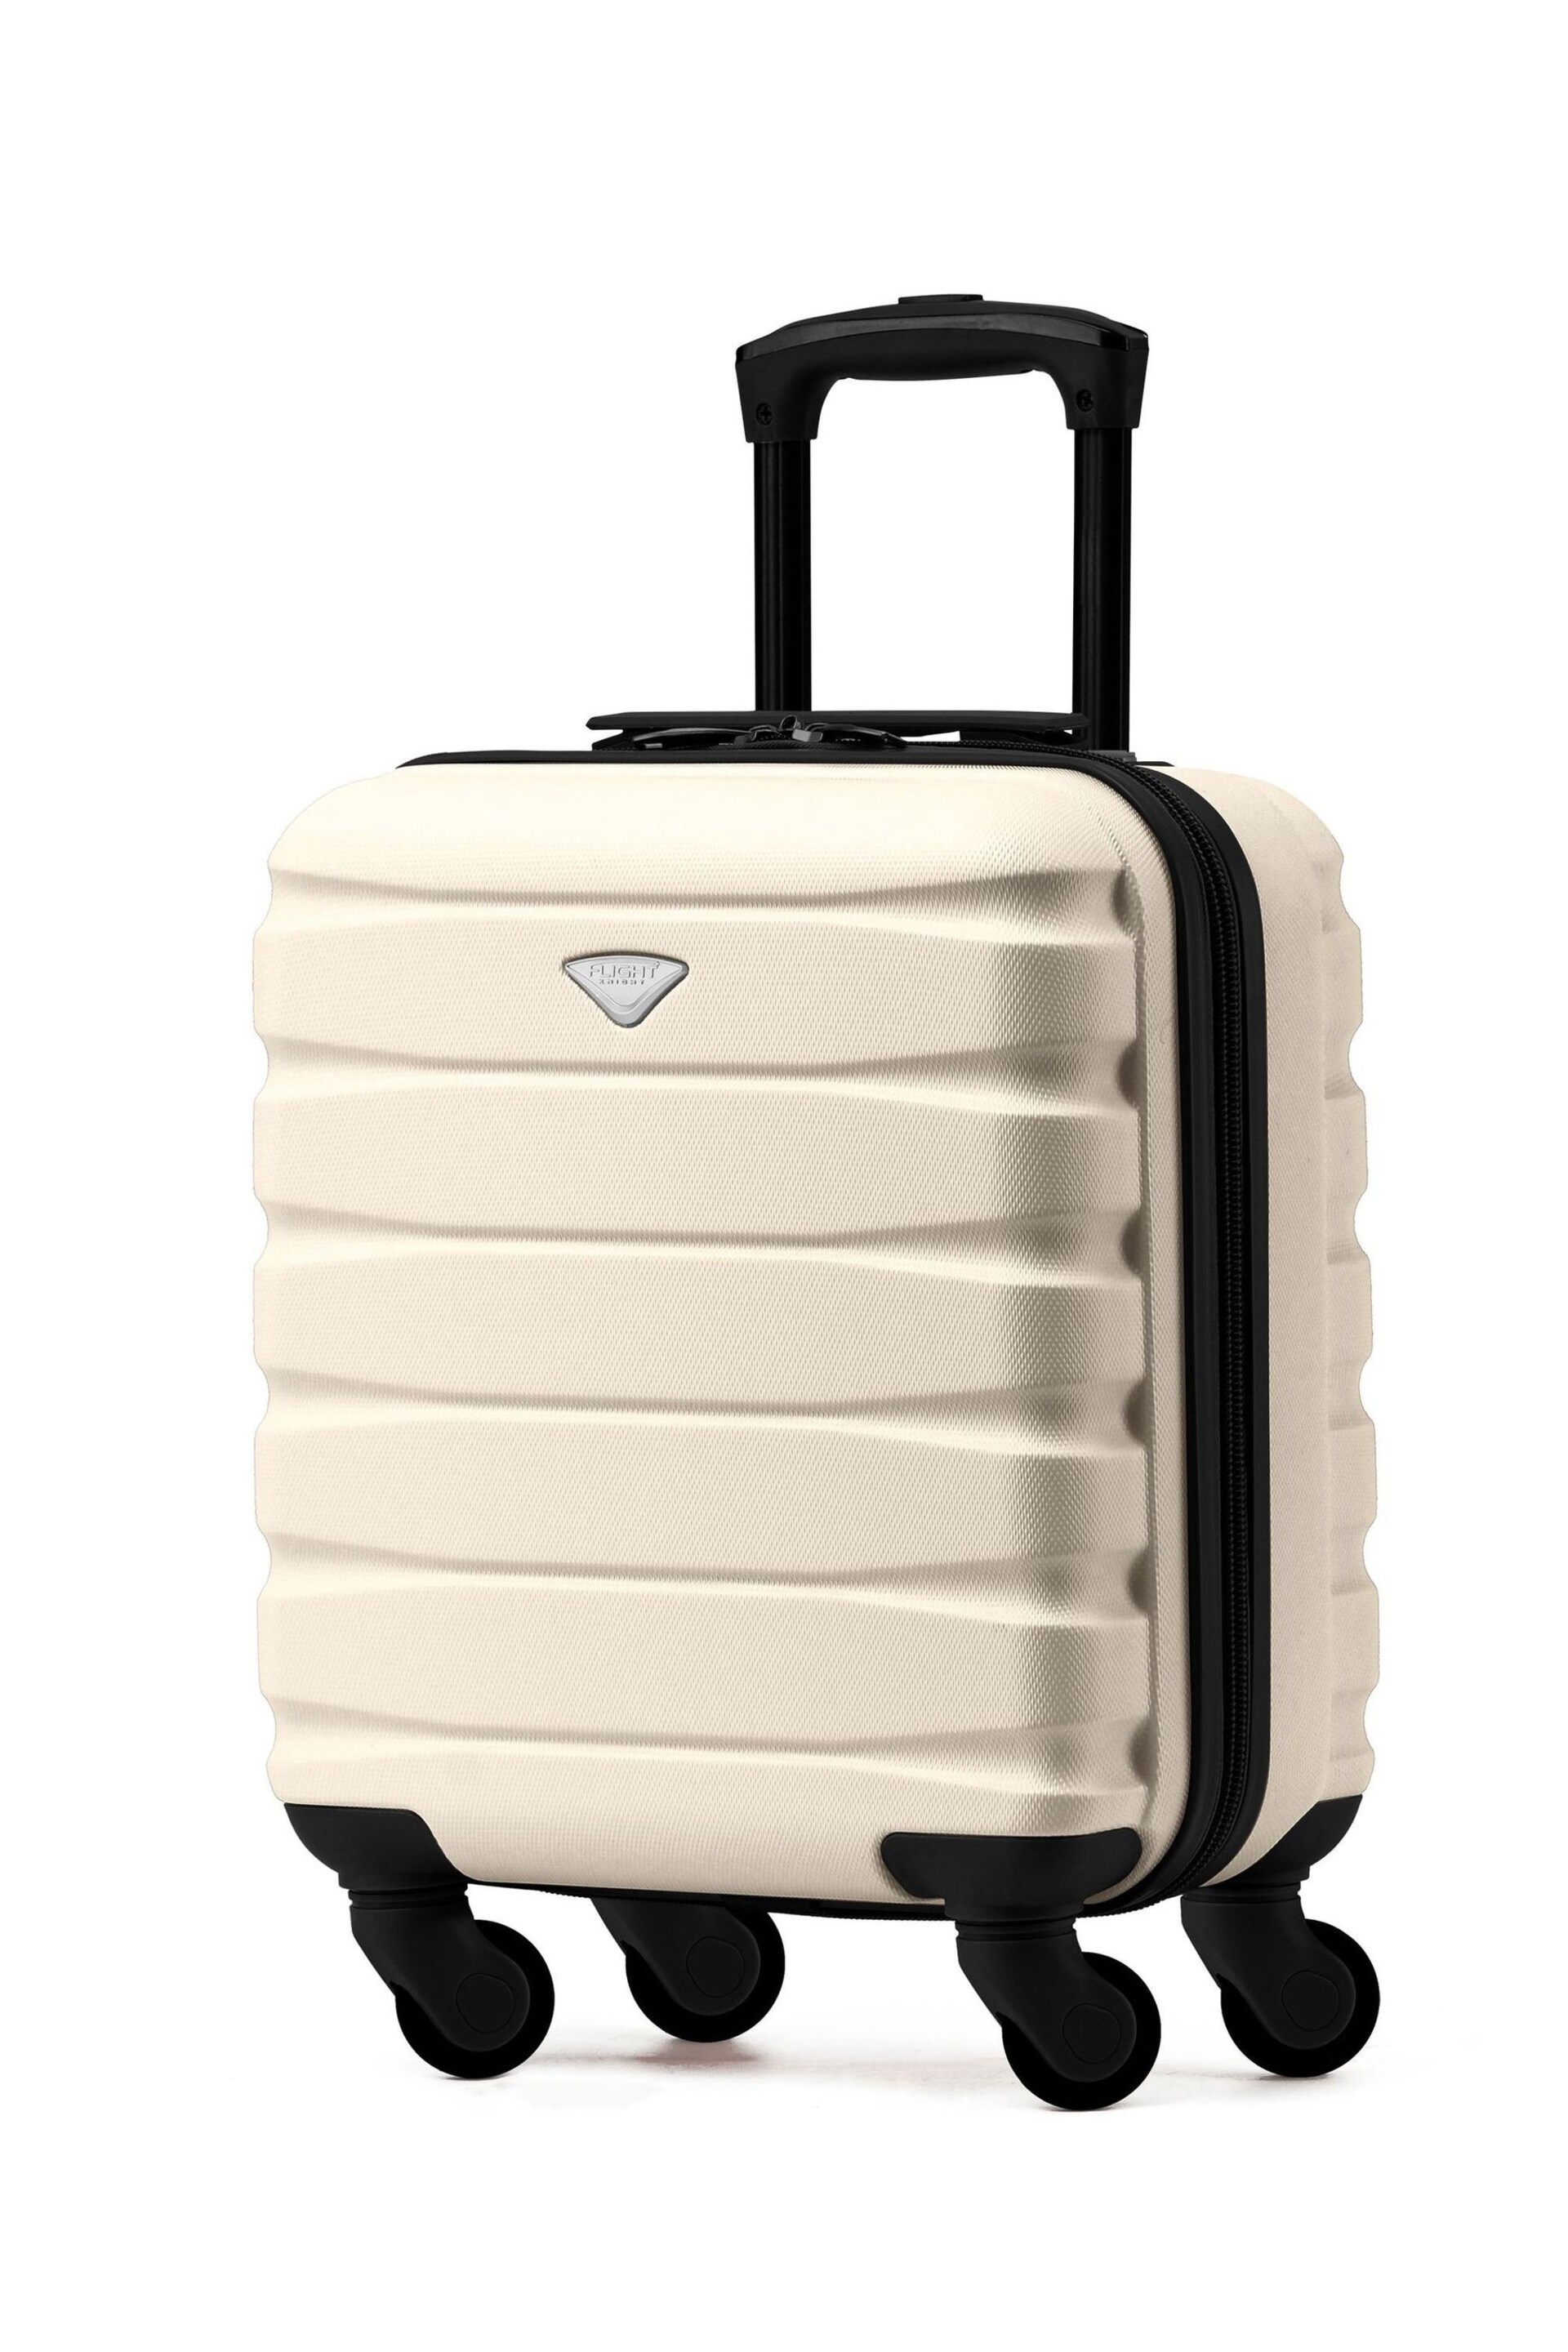 Flight Knight Cream EasyJet Underseat 4 Wheel ABS Hard Case Cabin Carry On Hand Luggage - Image 1 of 7